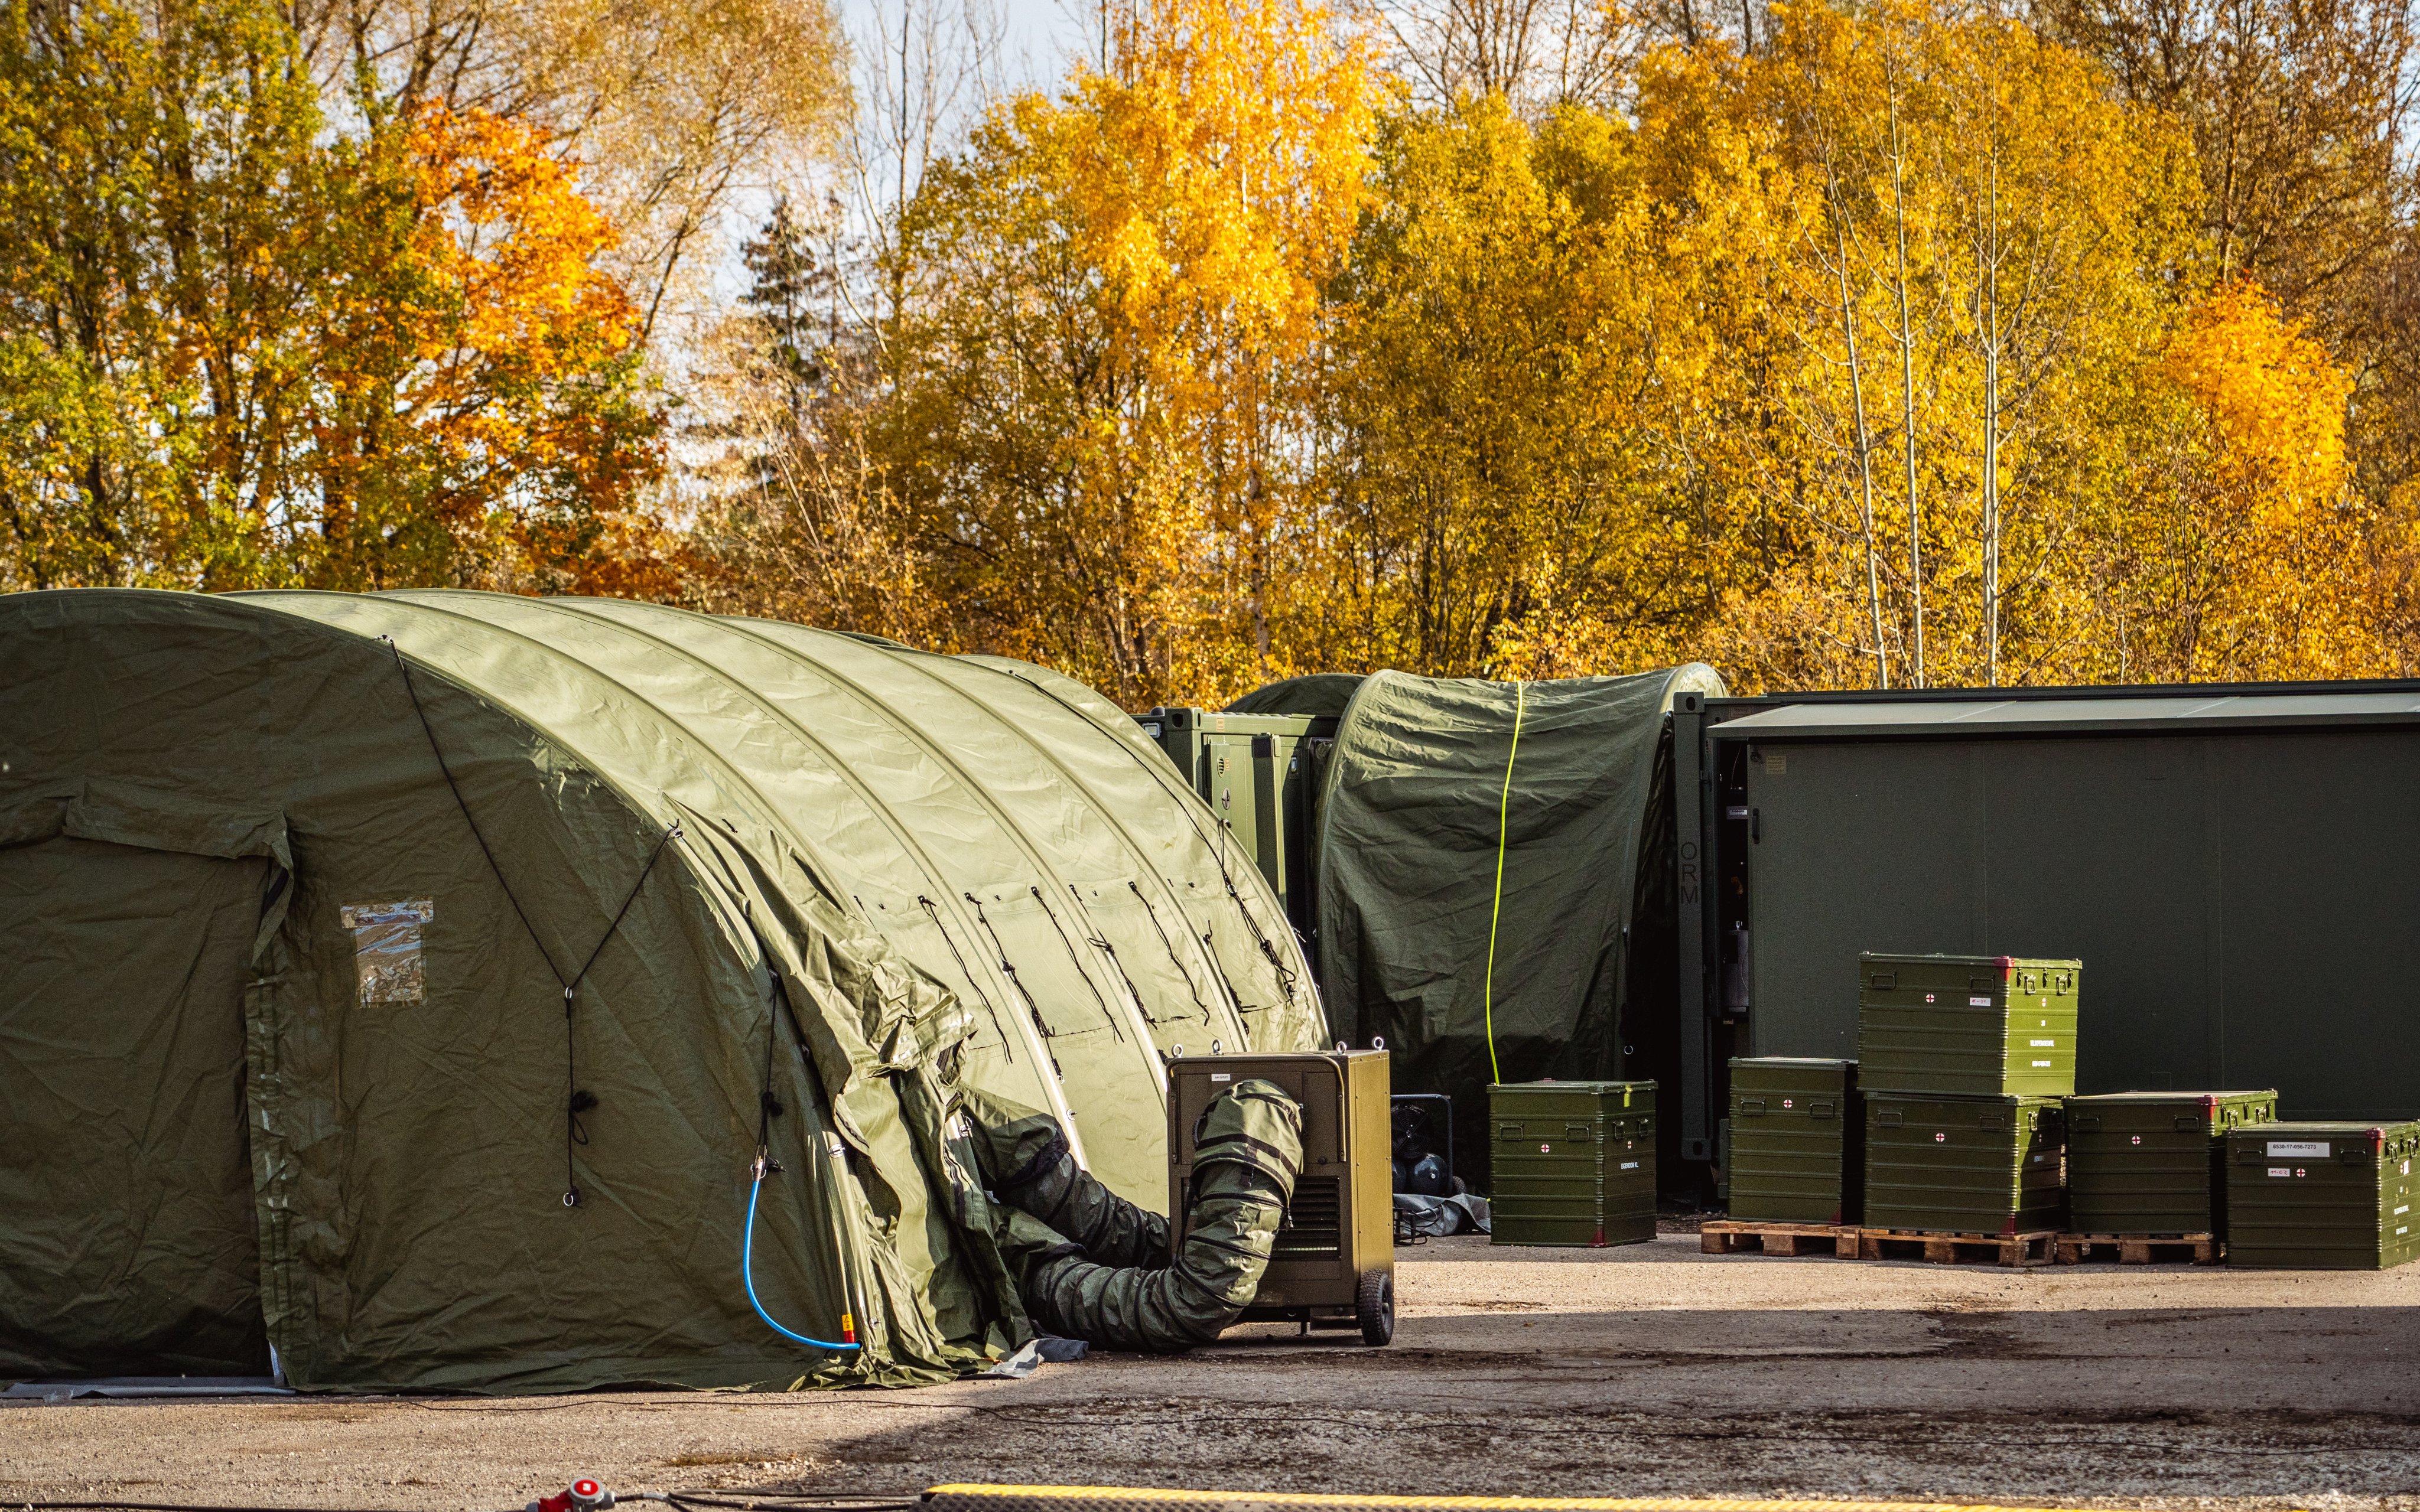 Estonia and Iceland have sent a field hospital to Ukraine, along with transportation provided by Germany